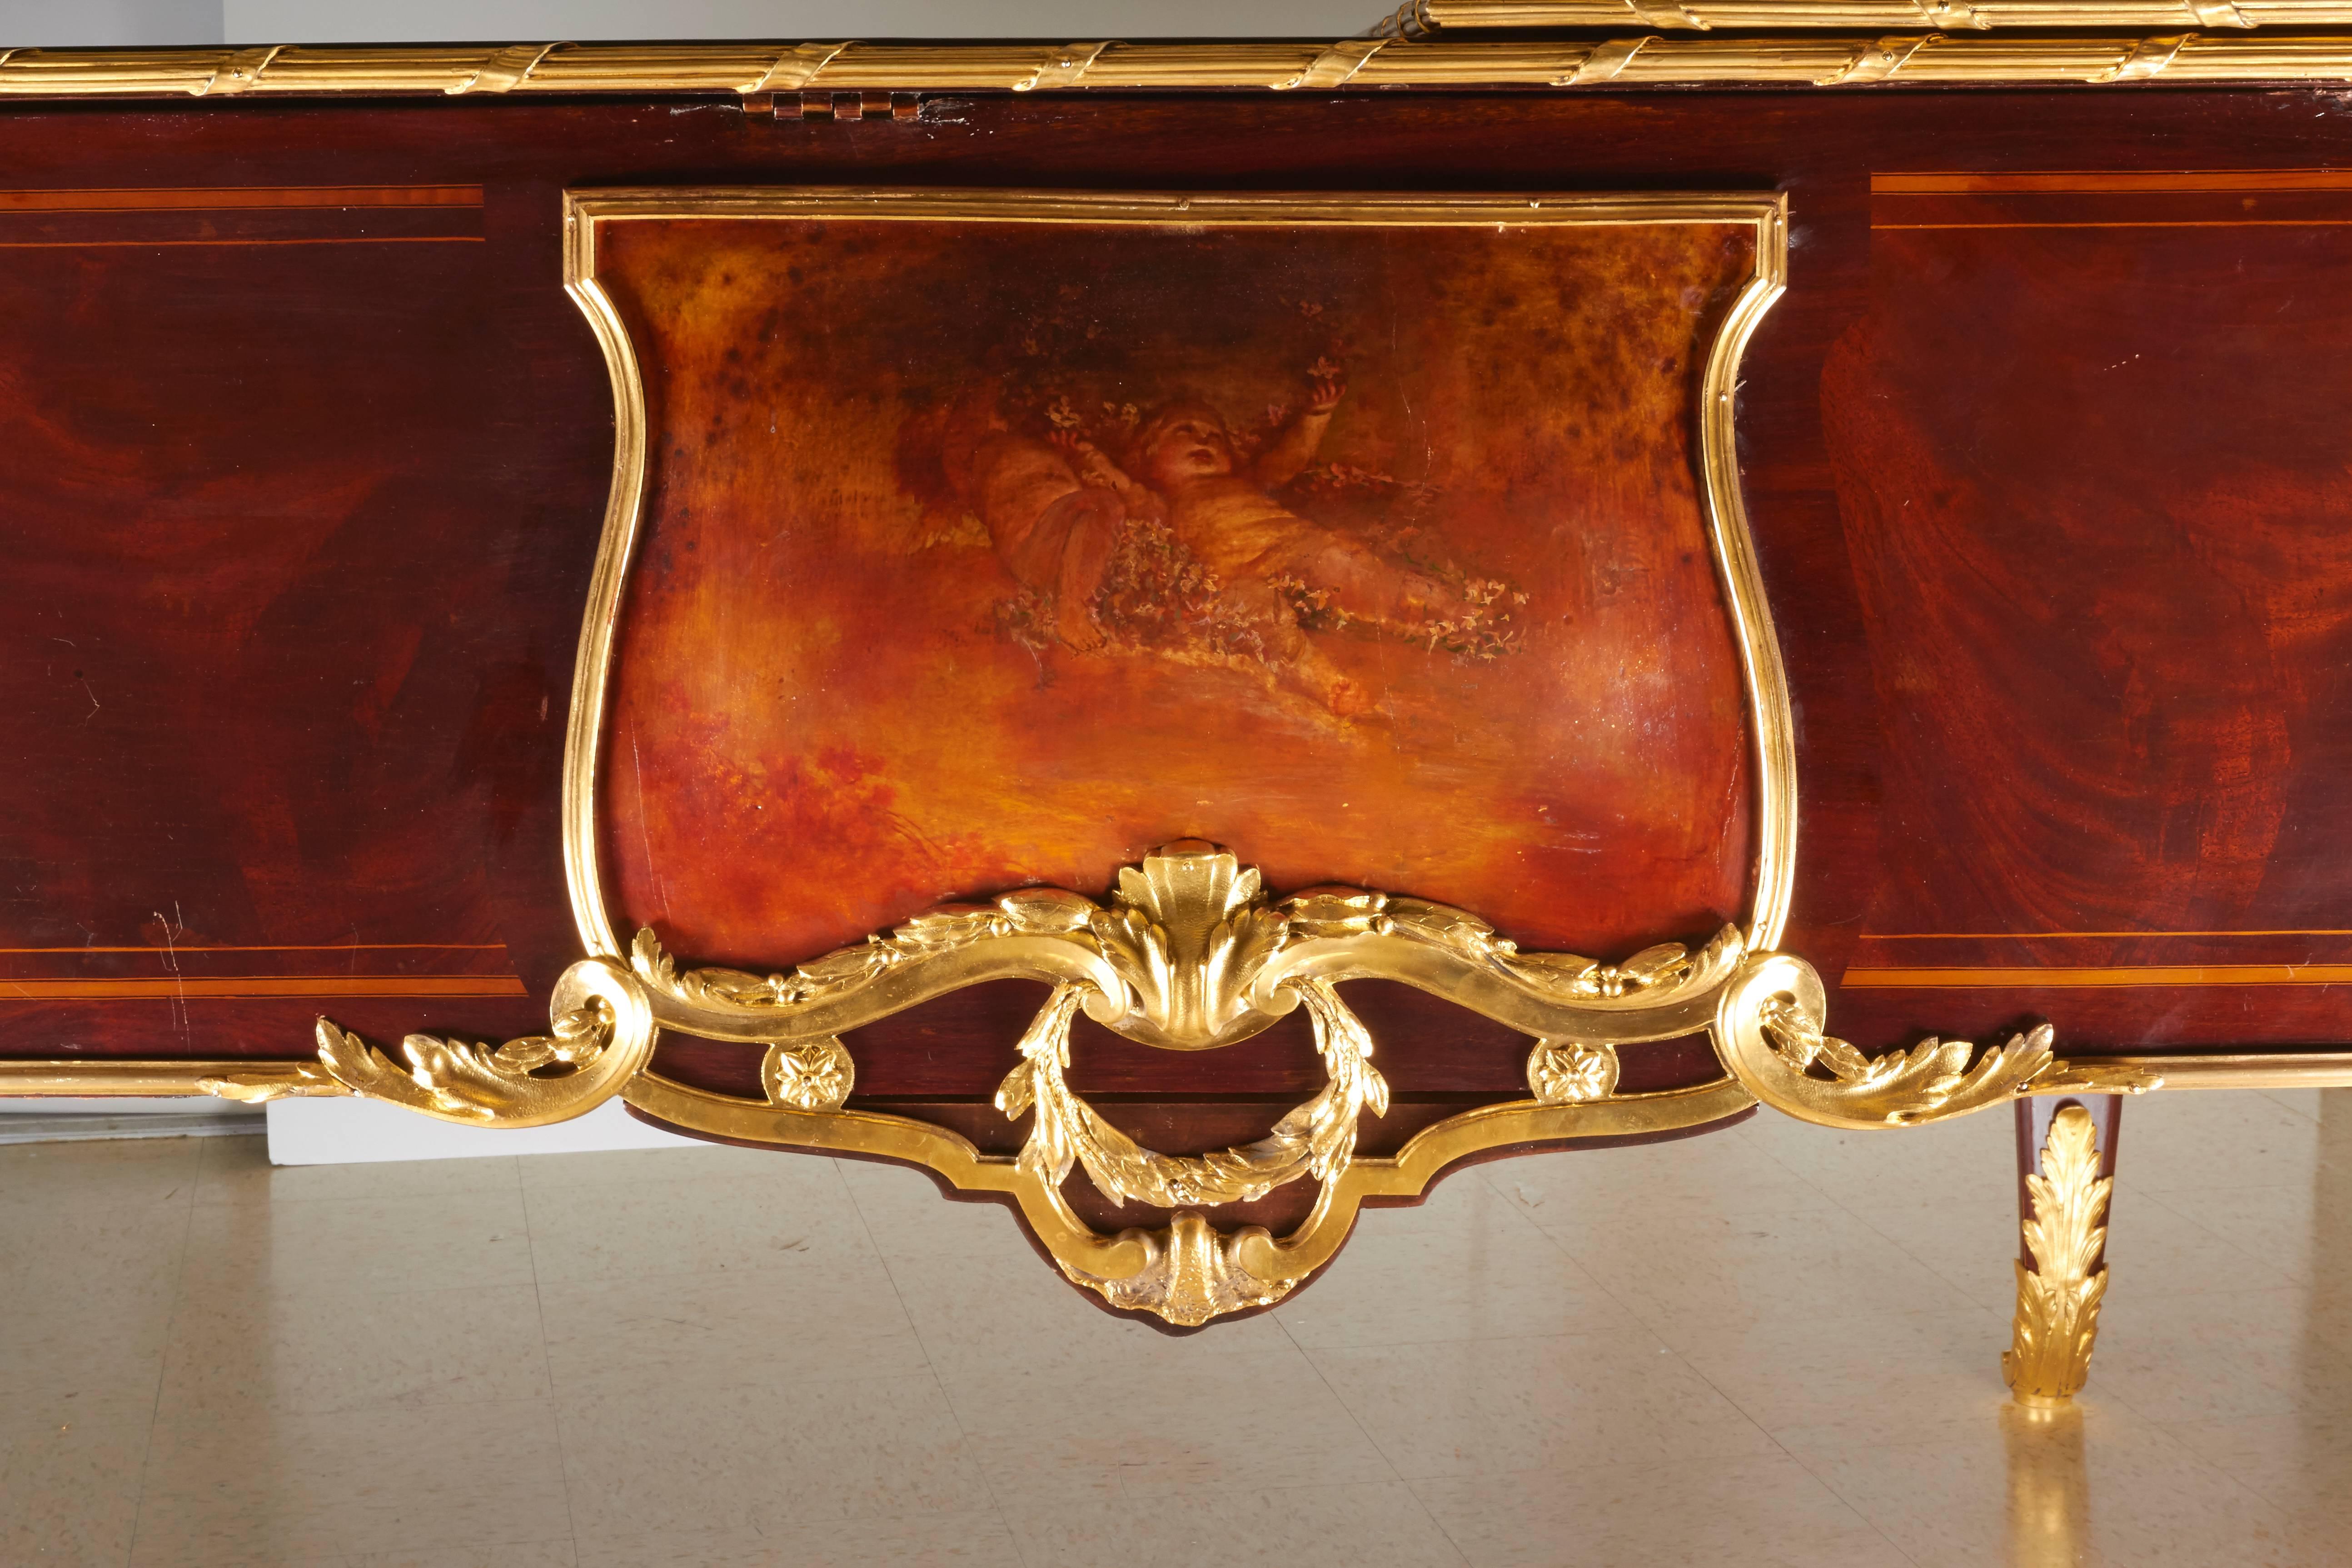 French Ormolu-Mounted Kingwood and Vernis Martin Piano by Pleyel and Barbedienne 1